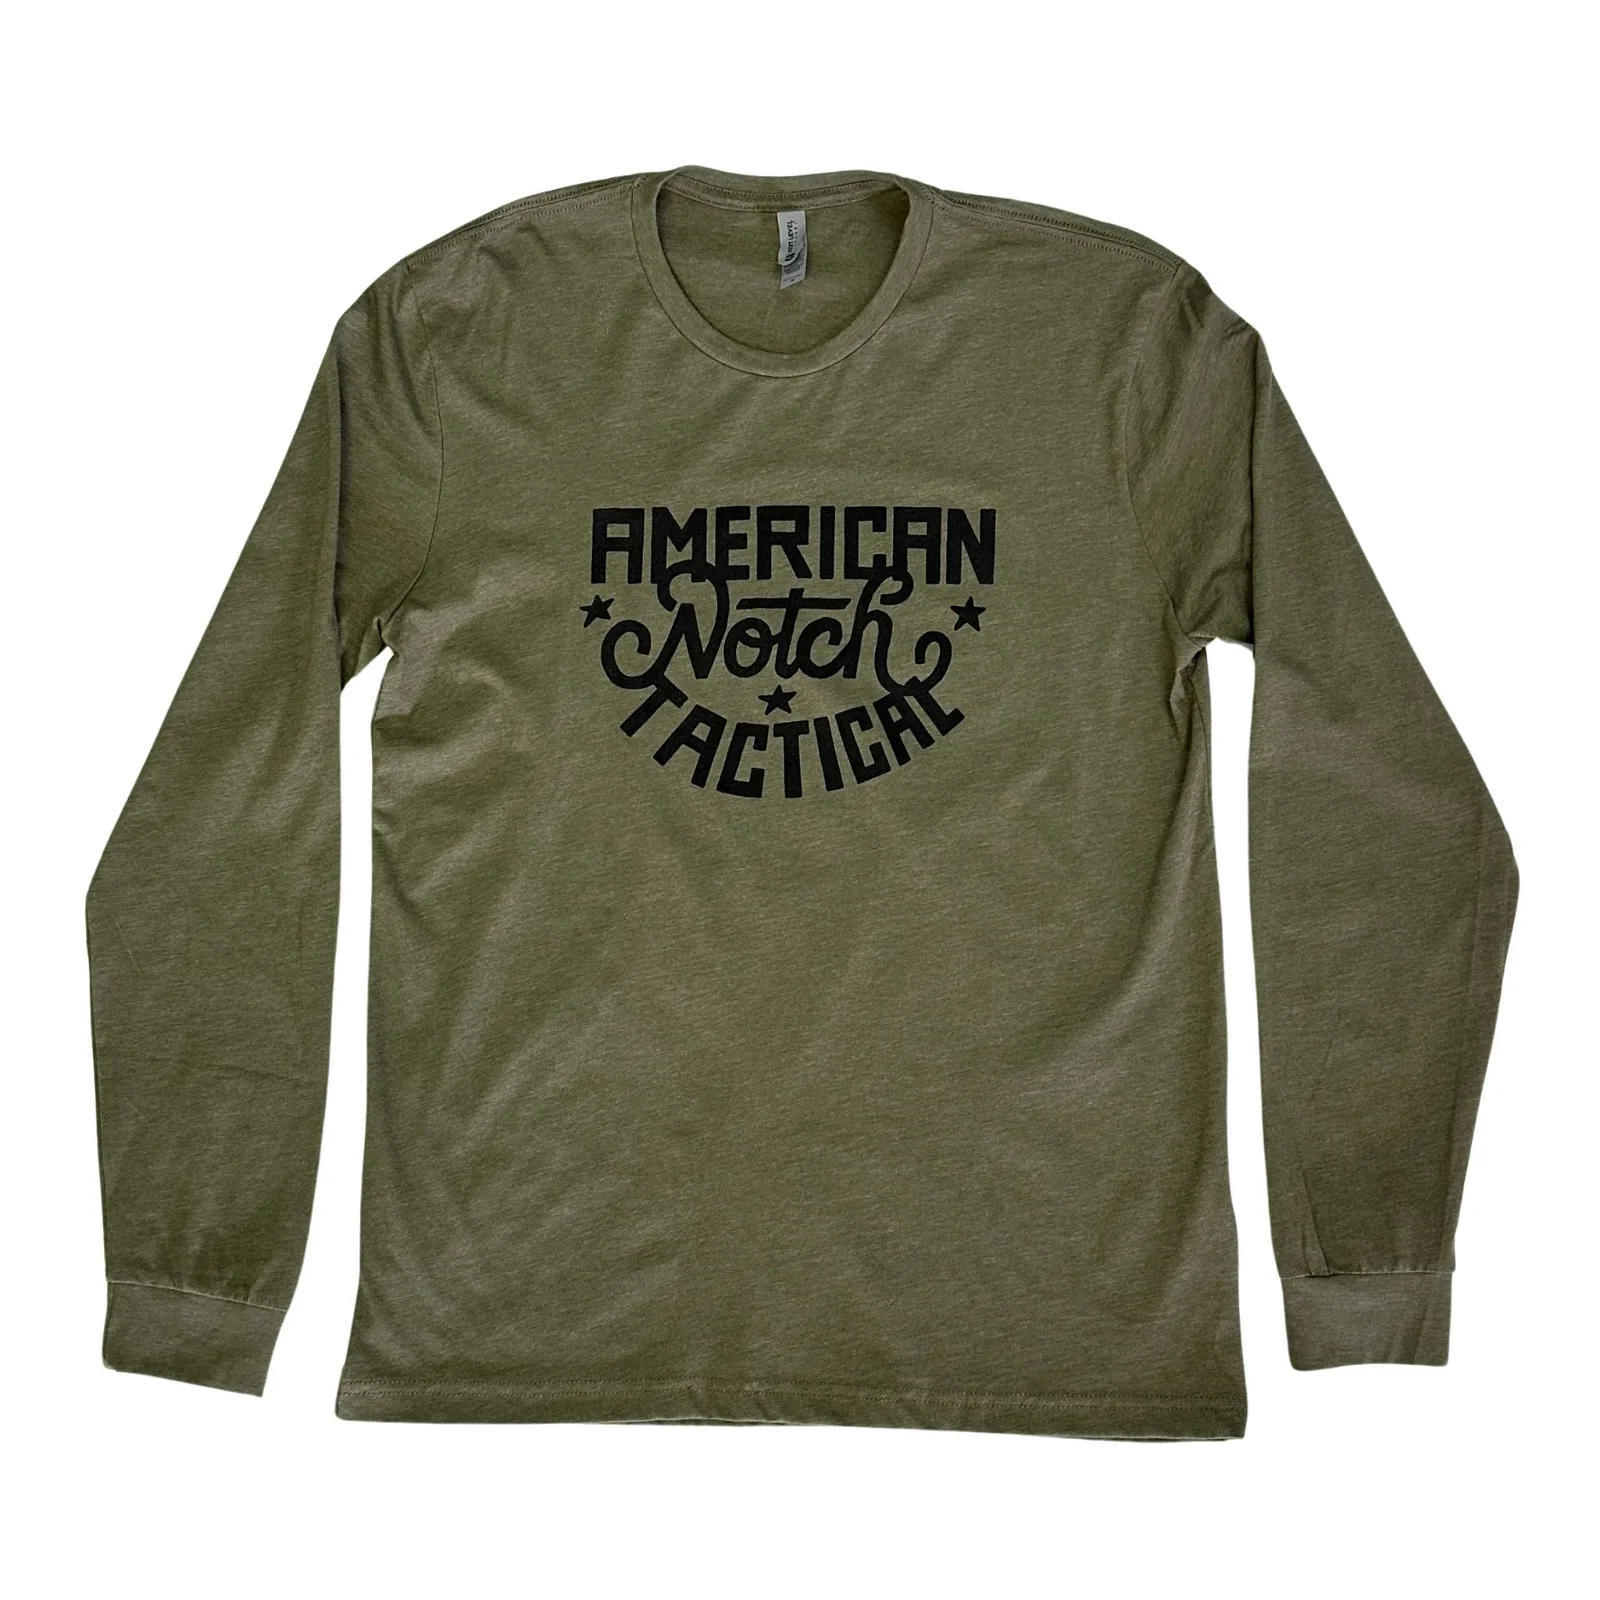 Image of Notch American Tactical Long Sleeve Tee - Military Green